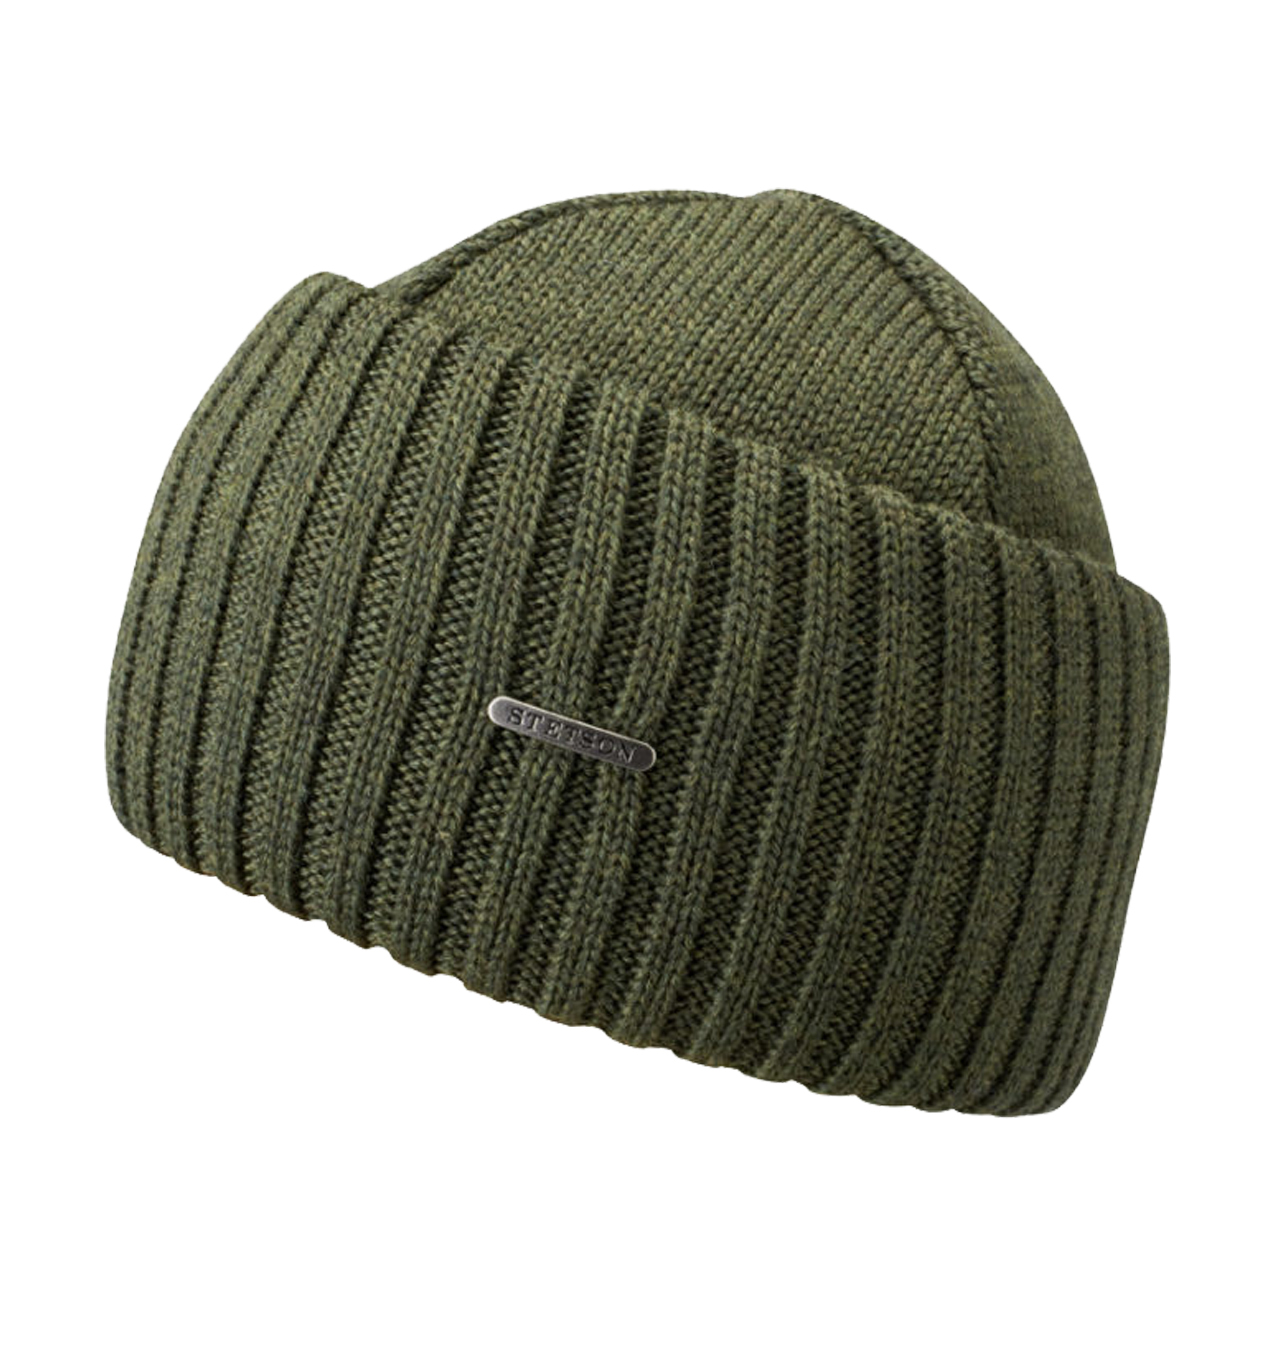 Stetson - Northport Knit Hat - Green